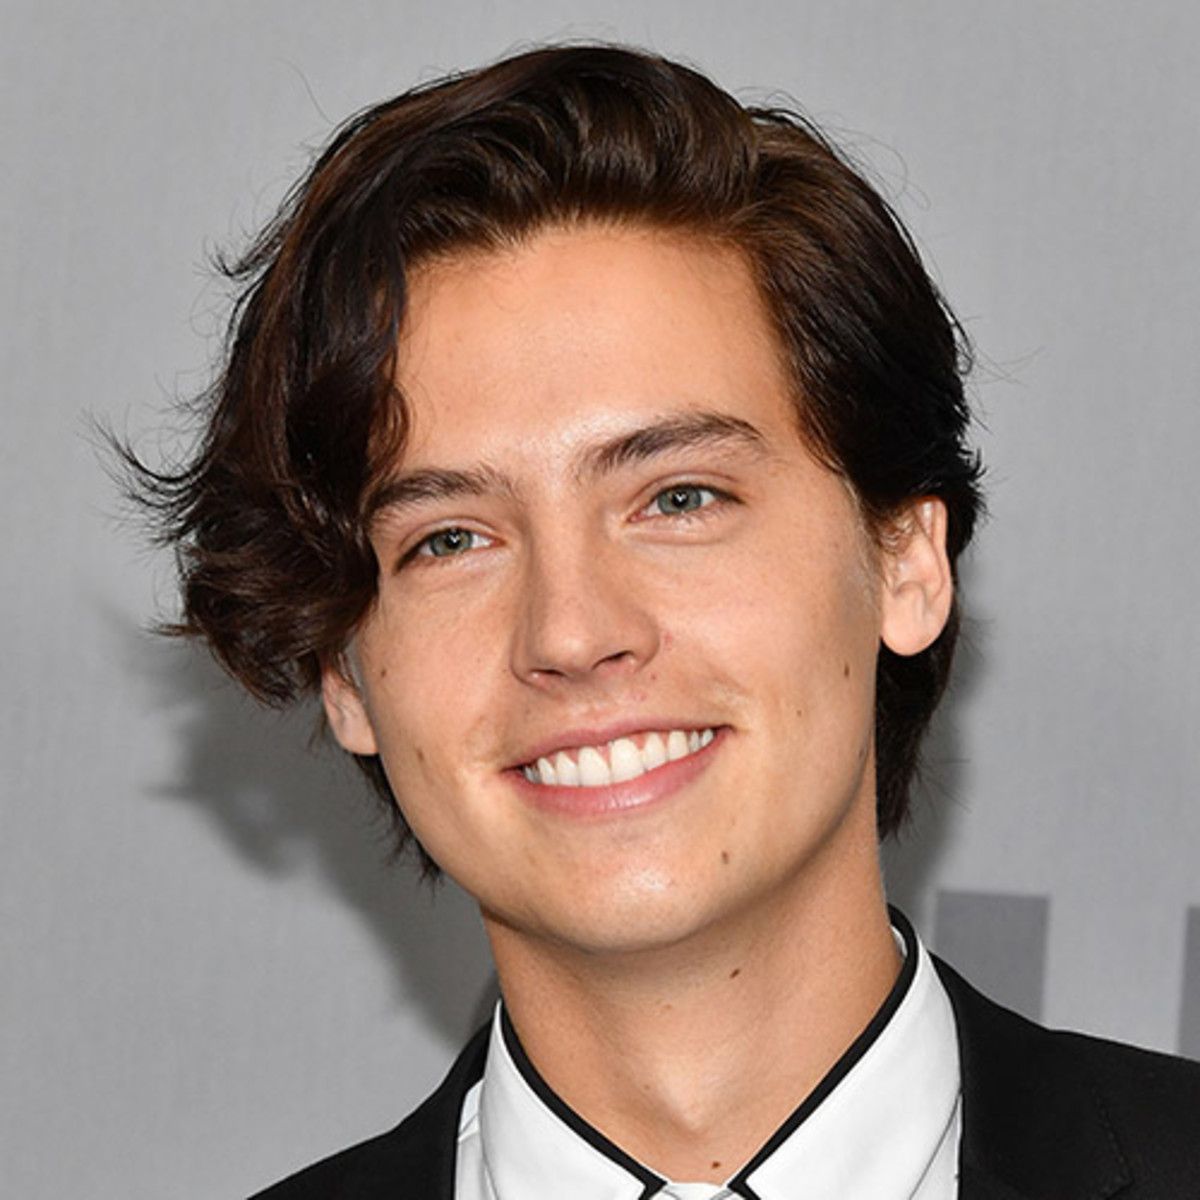 ÚLTIMA HORA! COLE SPROUSE GRAVE?!